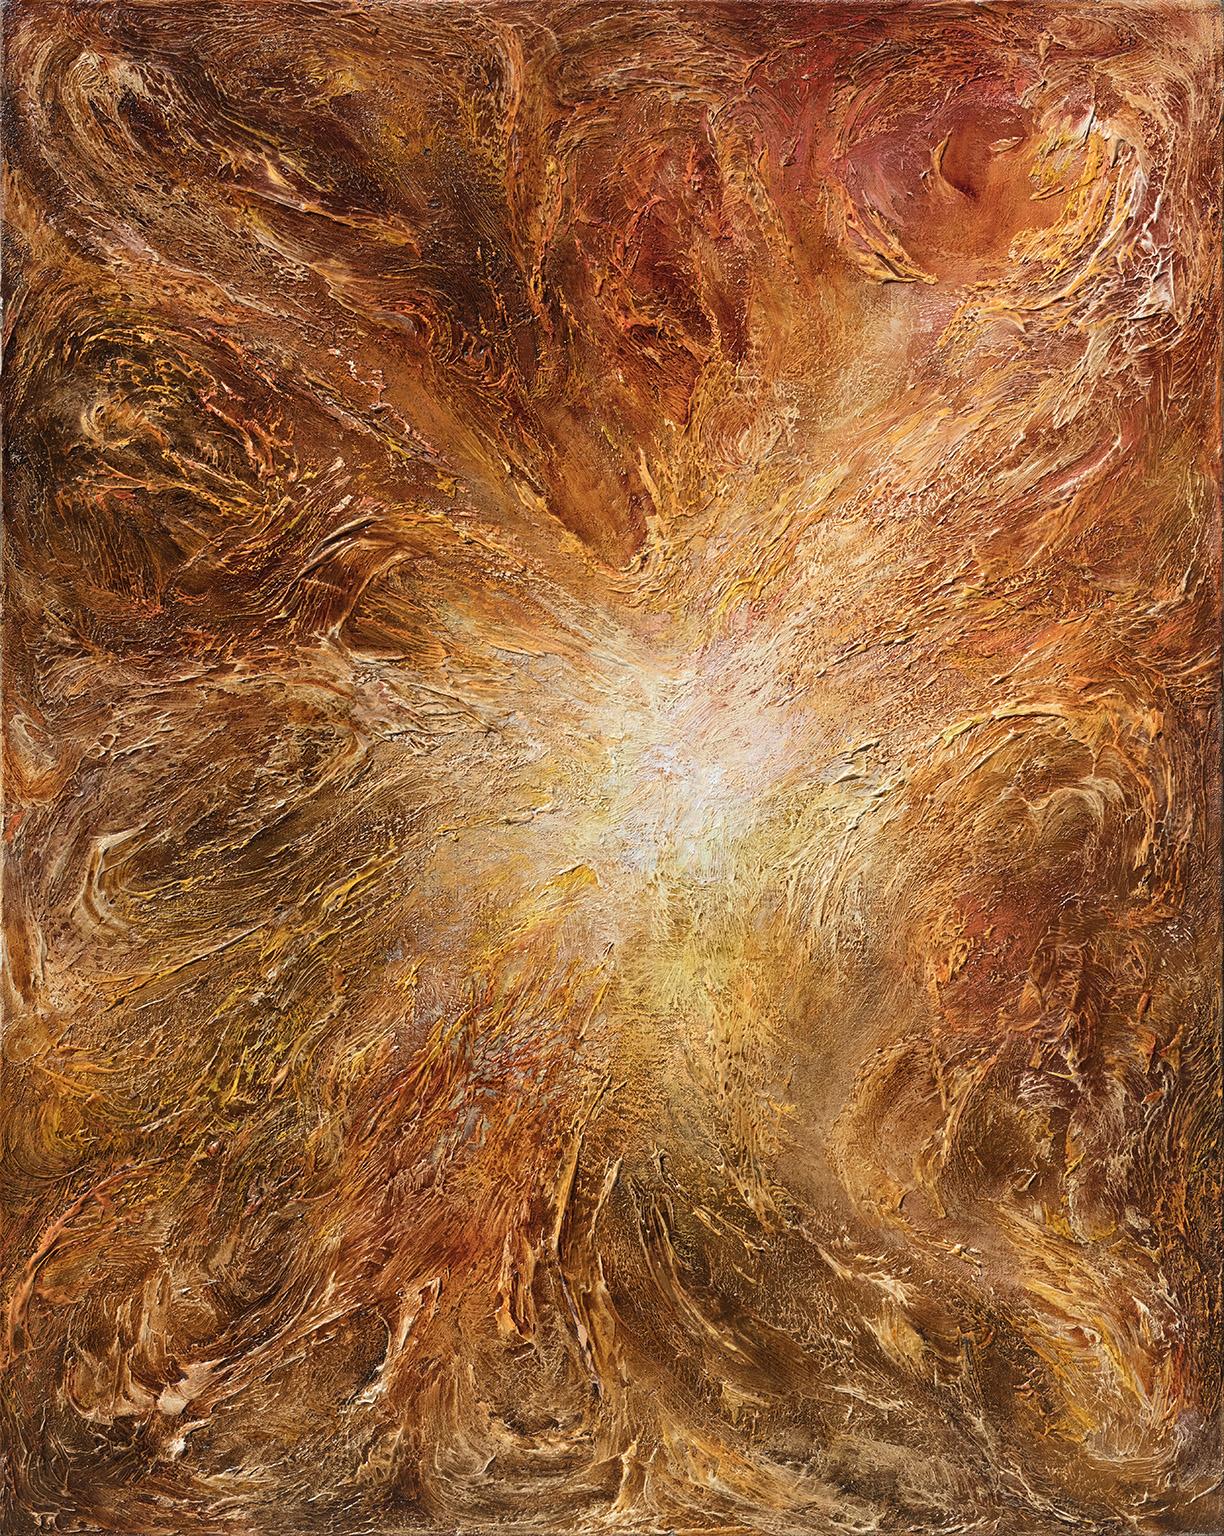 Ruggero Vanni Landscape Painting - Birth of Light - Abstract Gestural Oil Painting with Orange and Yellow Colors